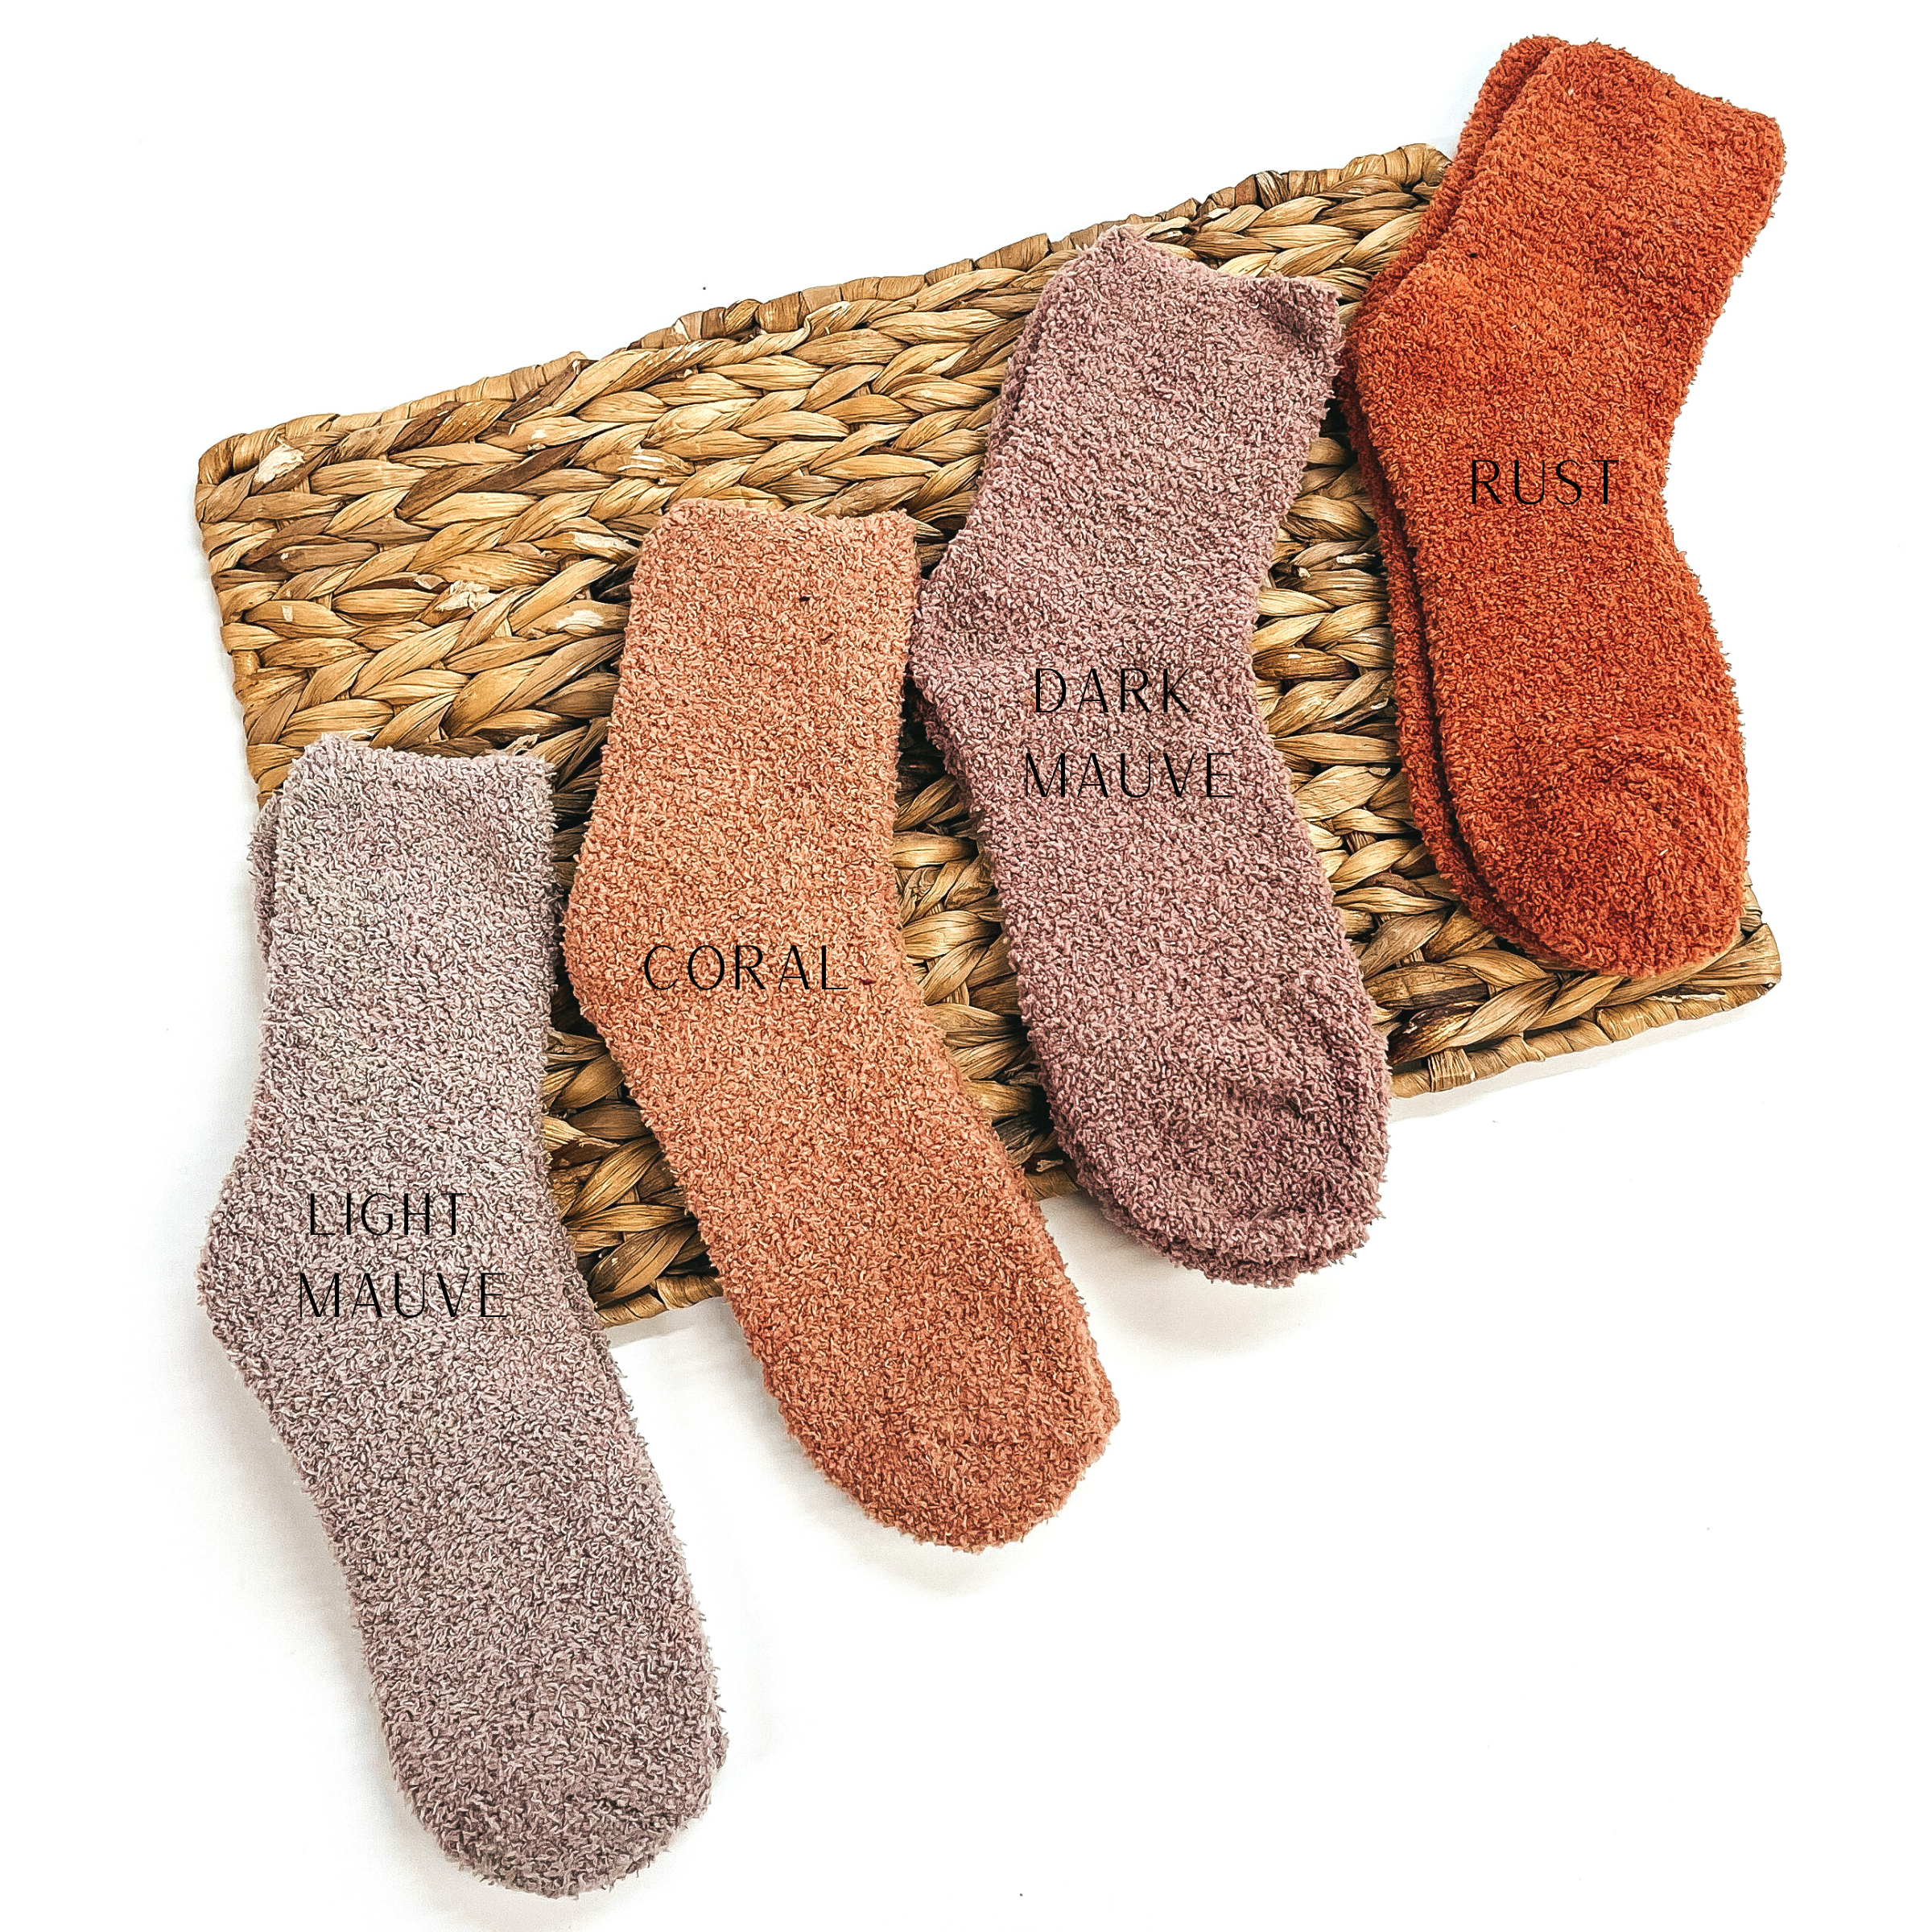 These are four pairs of fuzzy socks, from left to right; light mauve, coral, dark mauve,  and rust. These socks are taken on a brown woven slate and on a white  background.